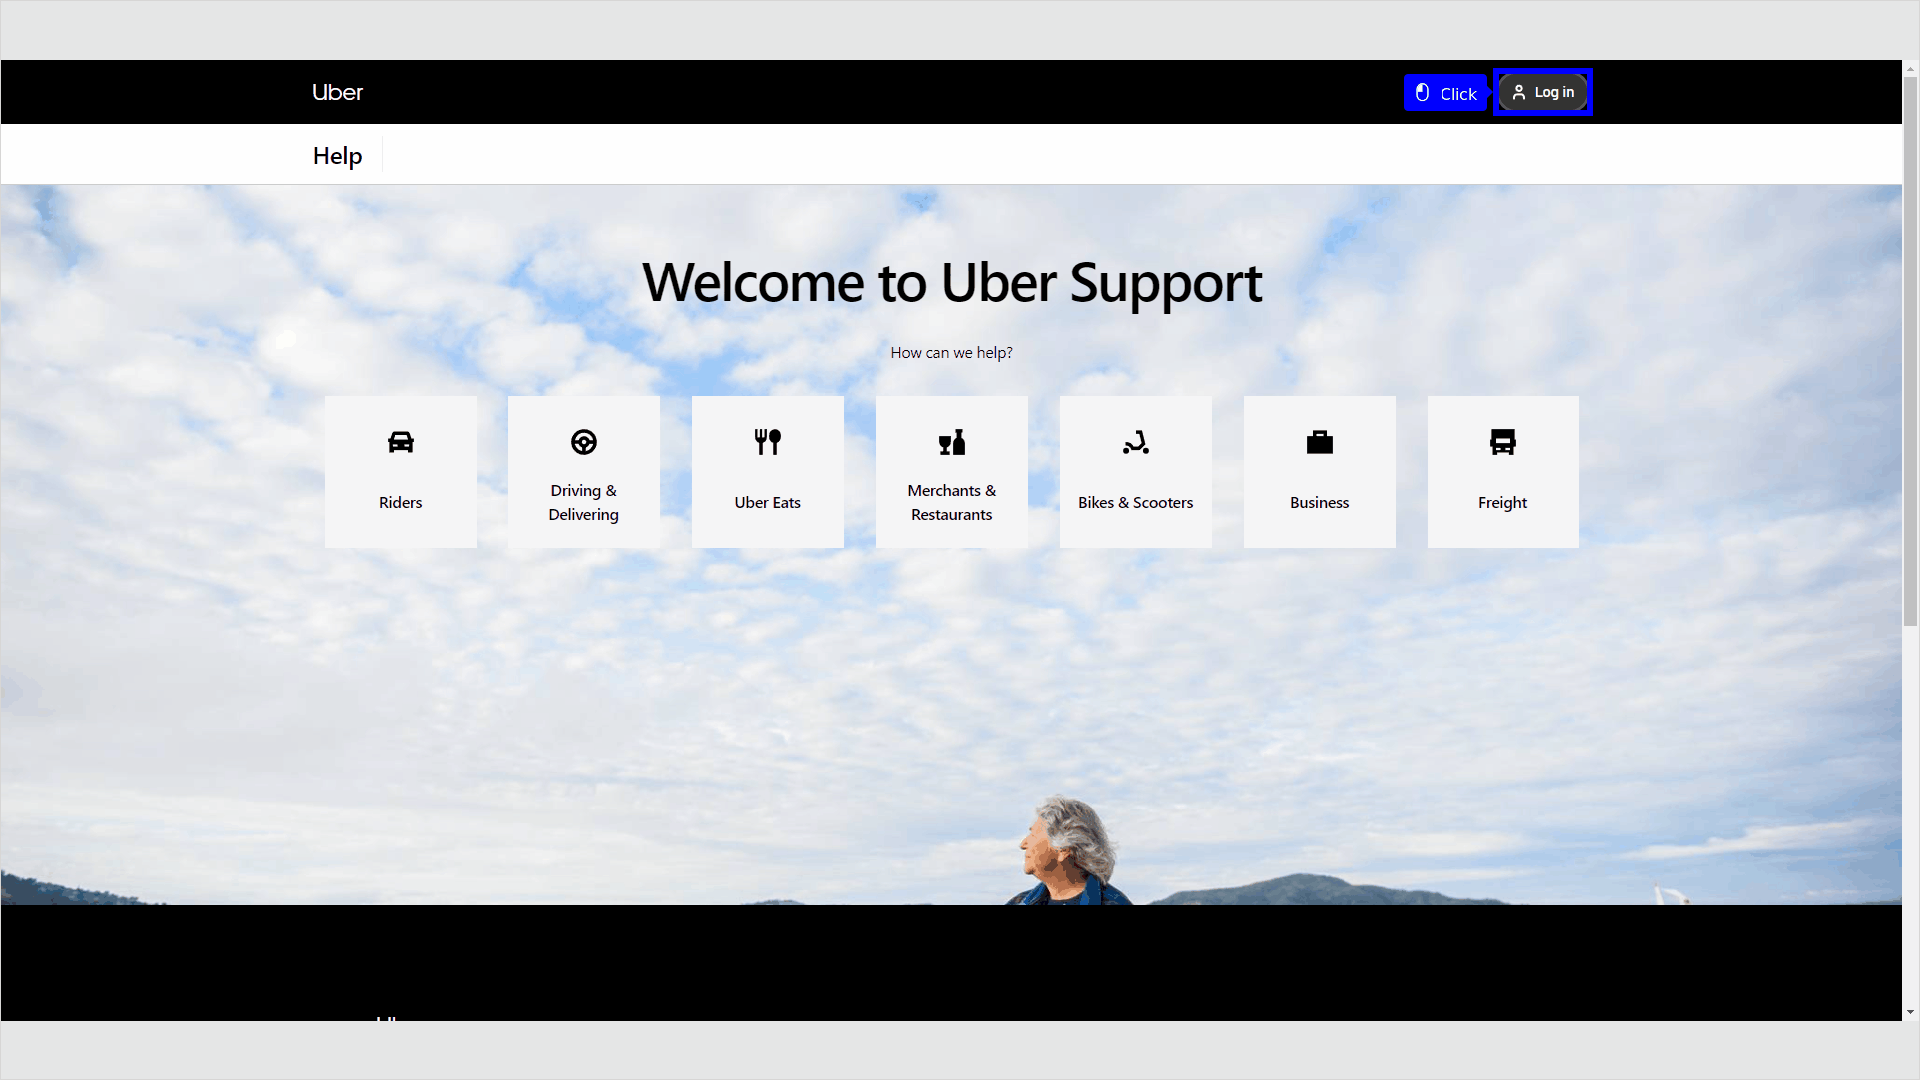 GIF showing how to delete an Uber account using the Uber Website